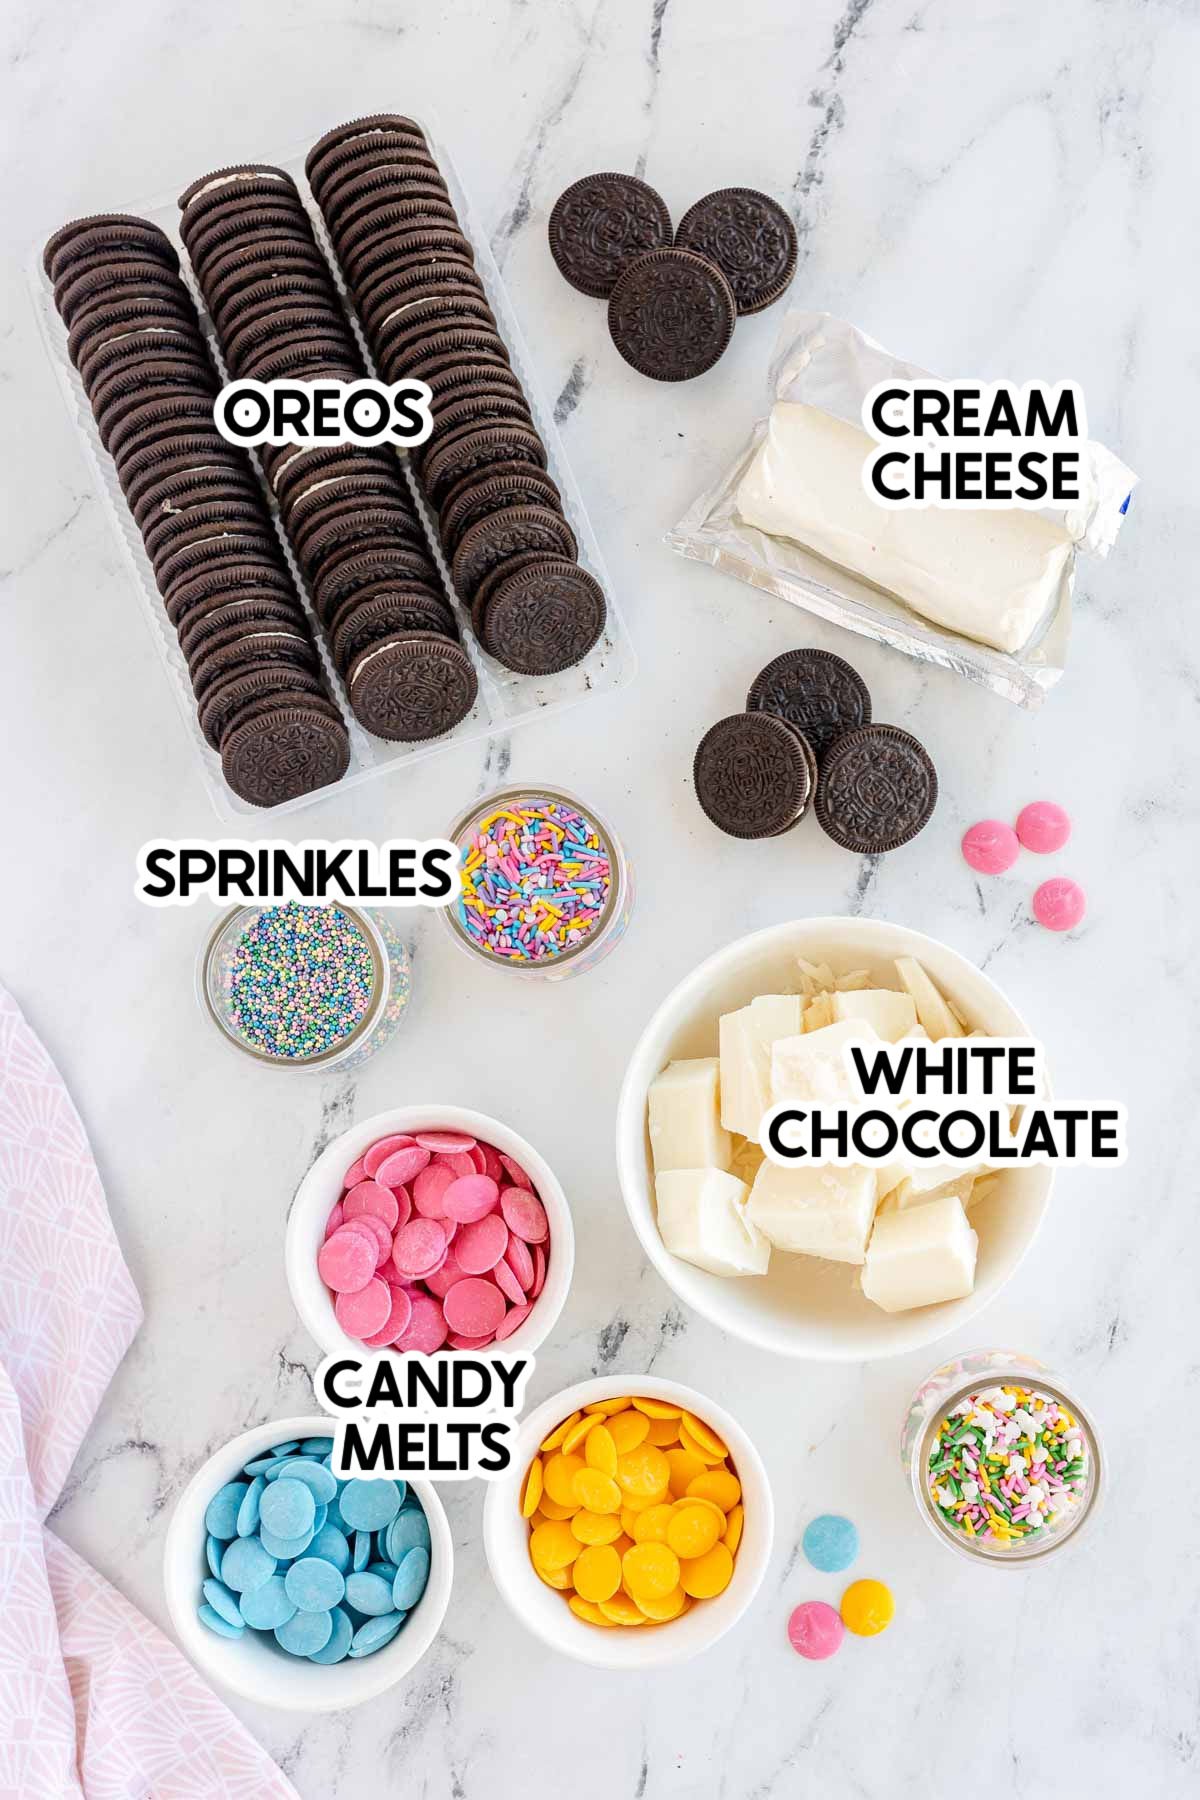 ingredients for Oreo Easter egg truffles with labels